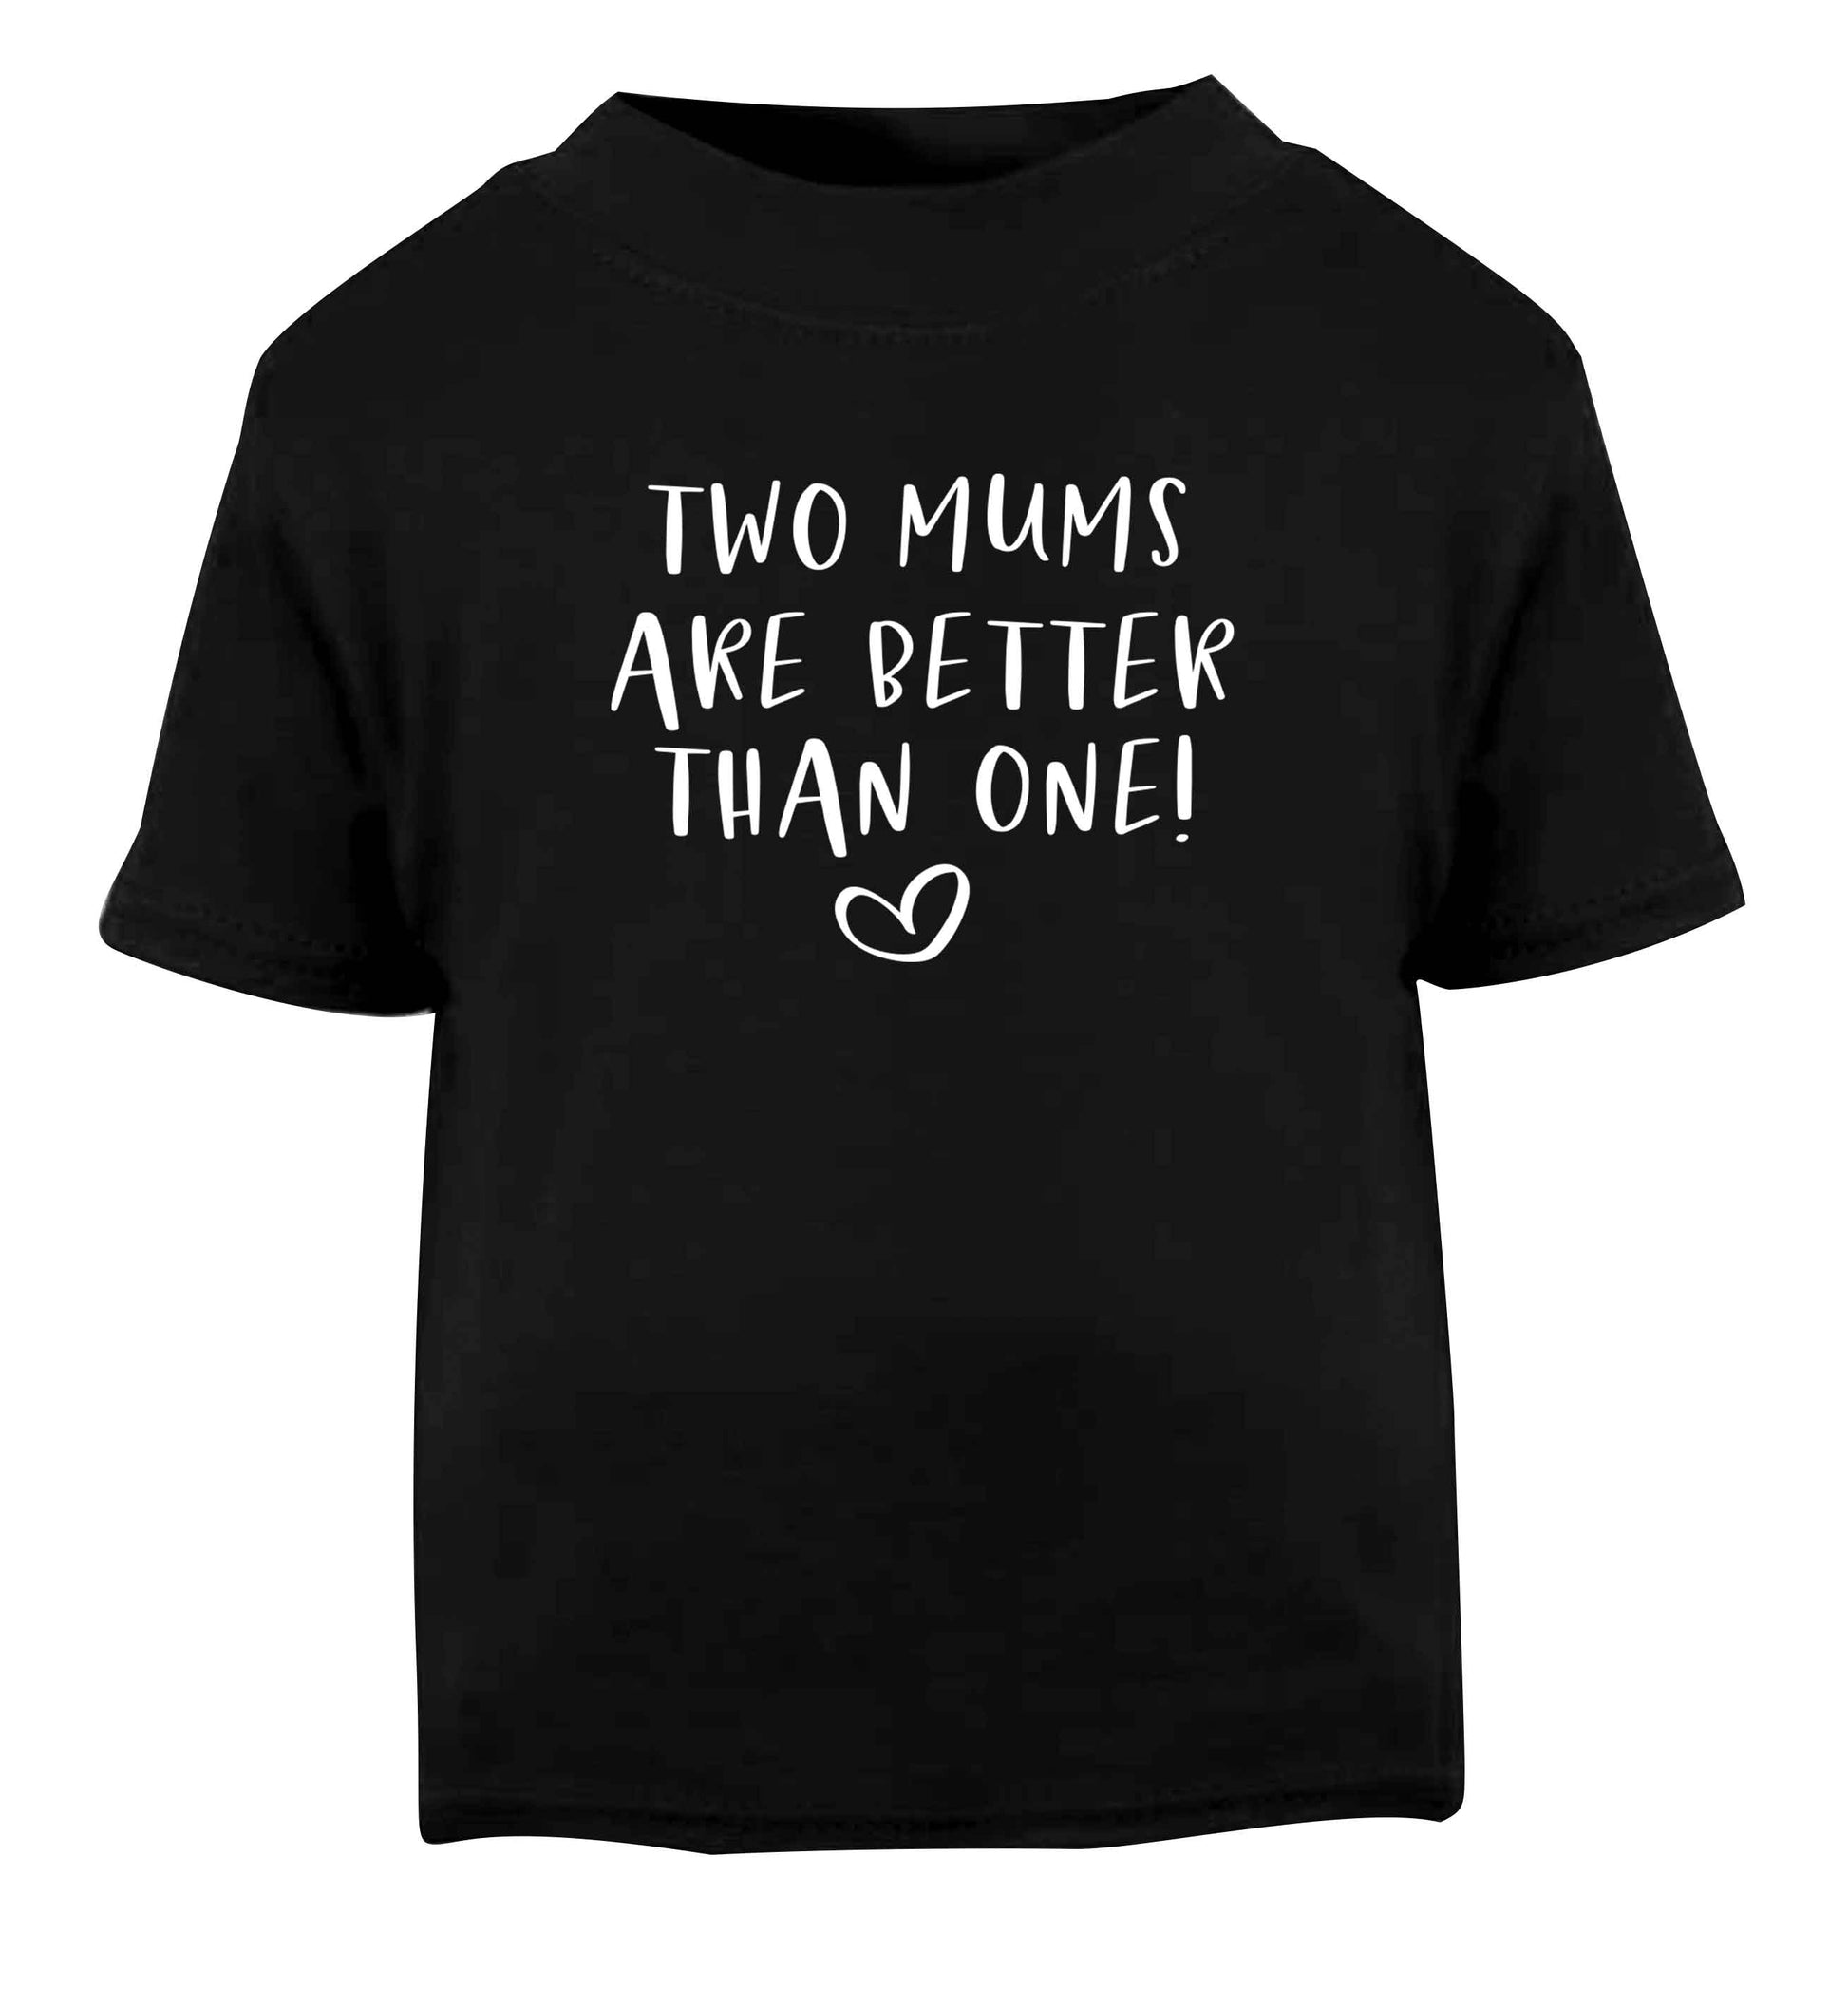 Two mums are better than one Black baby toddler Tshirt 2 years